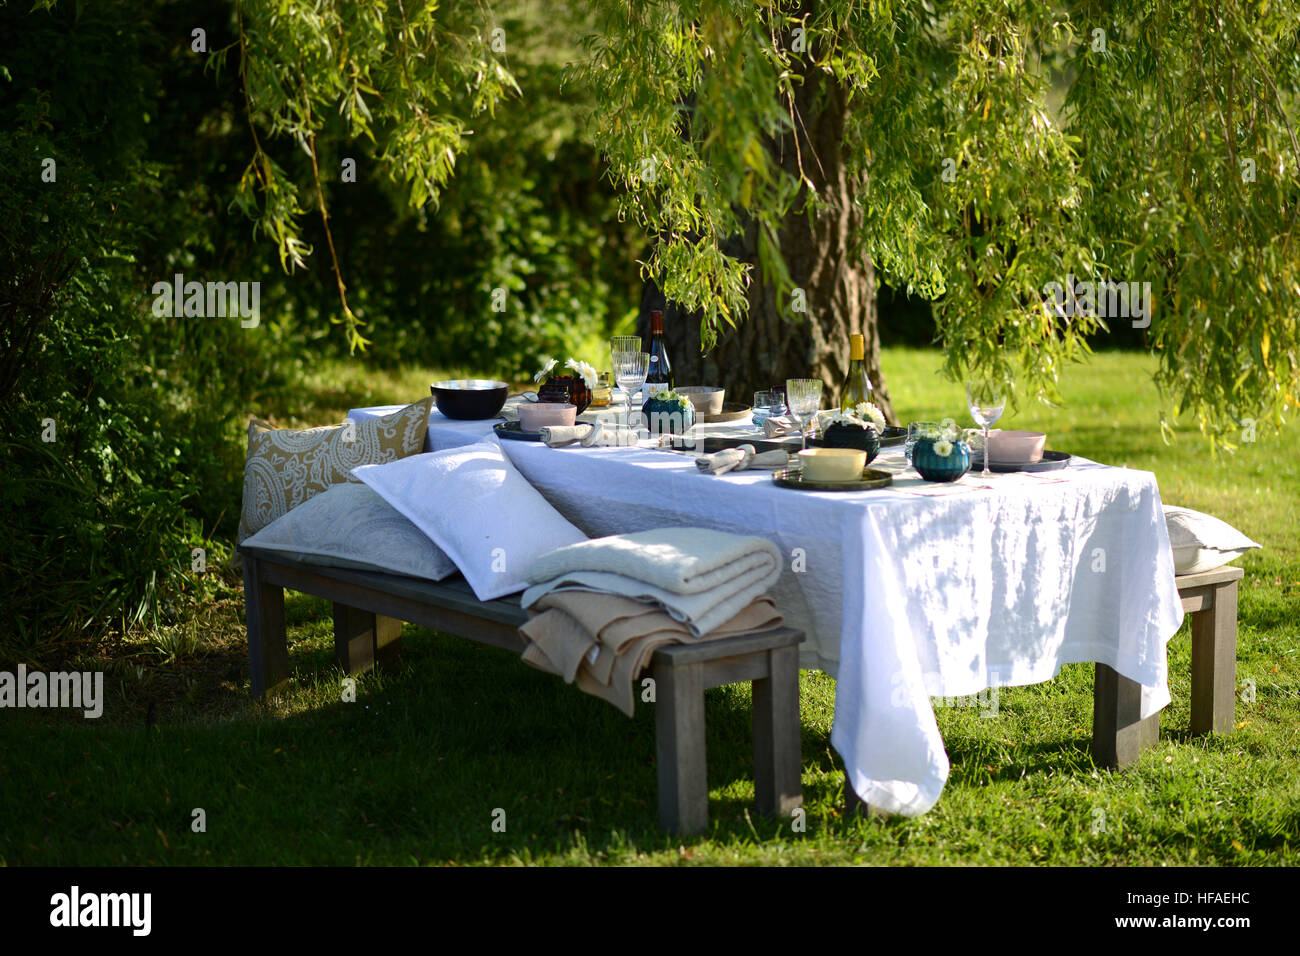 Alfresco dining, table set for an evening meal outside Stock Photo